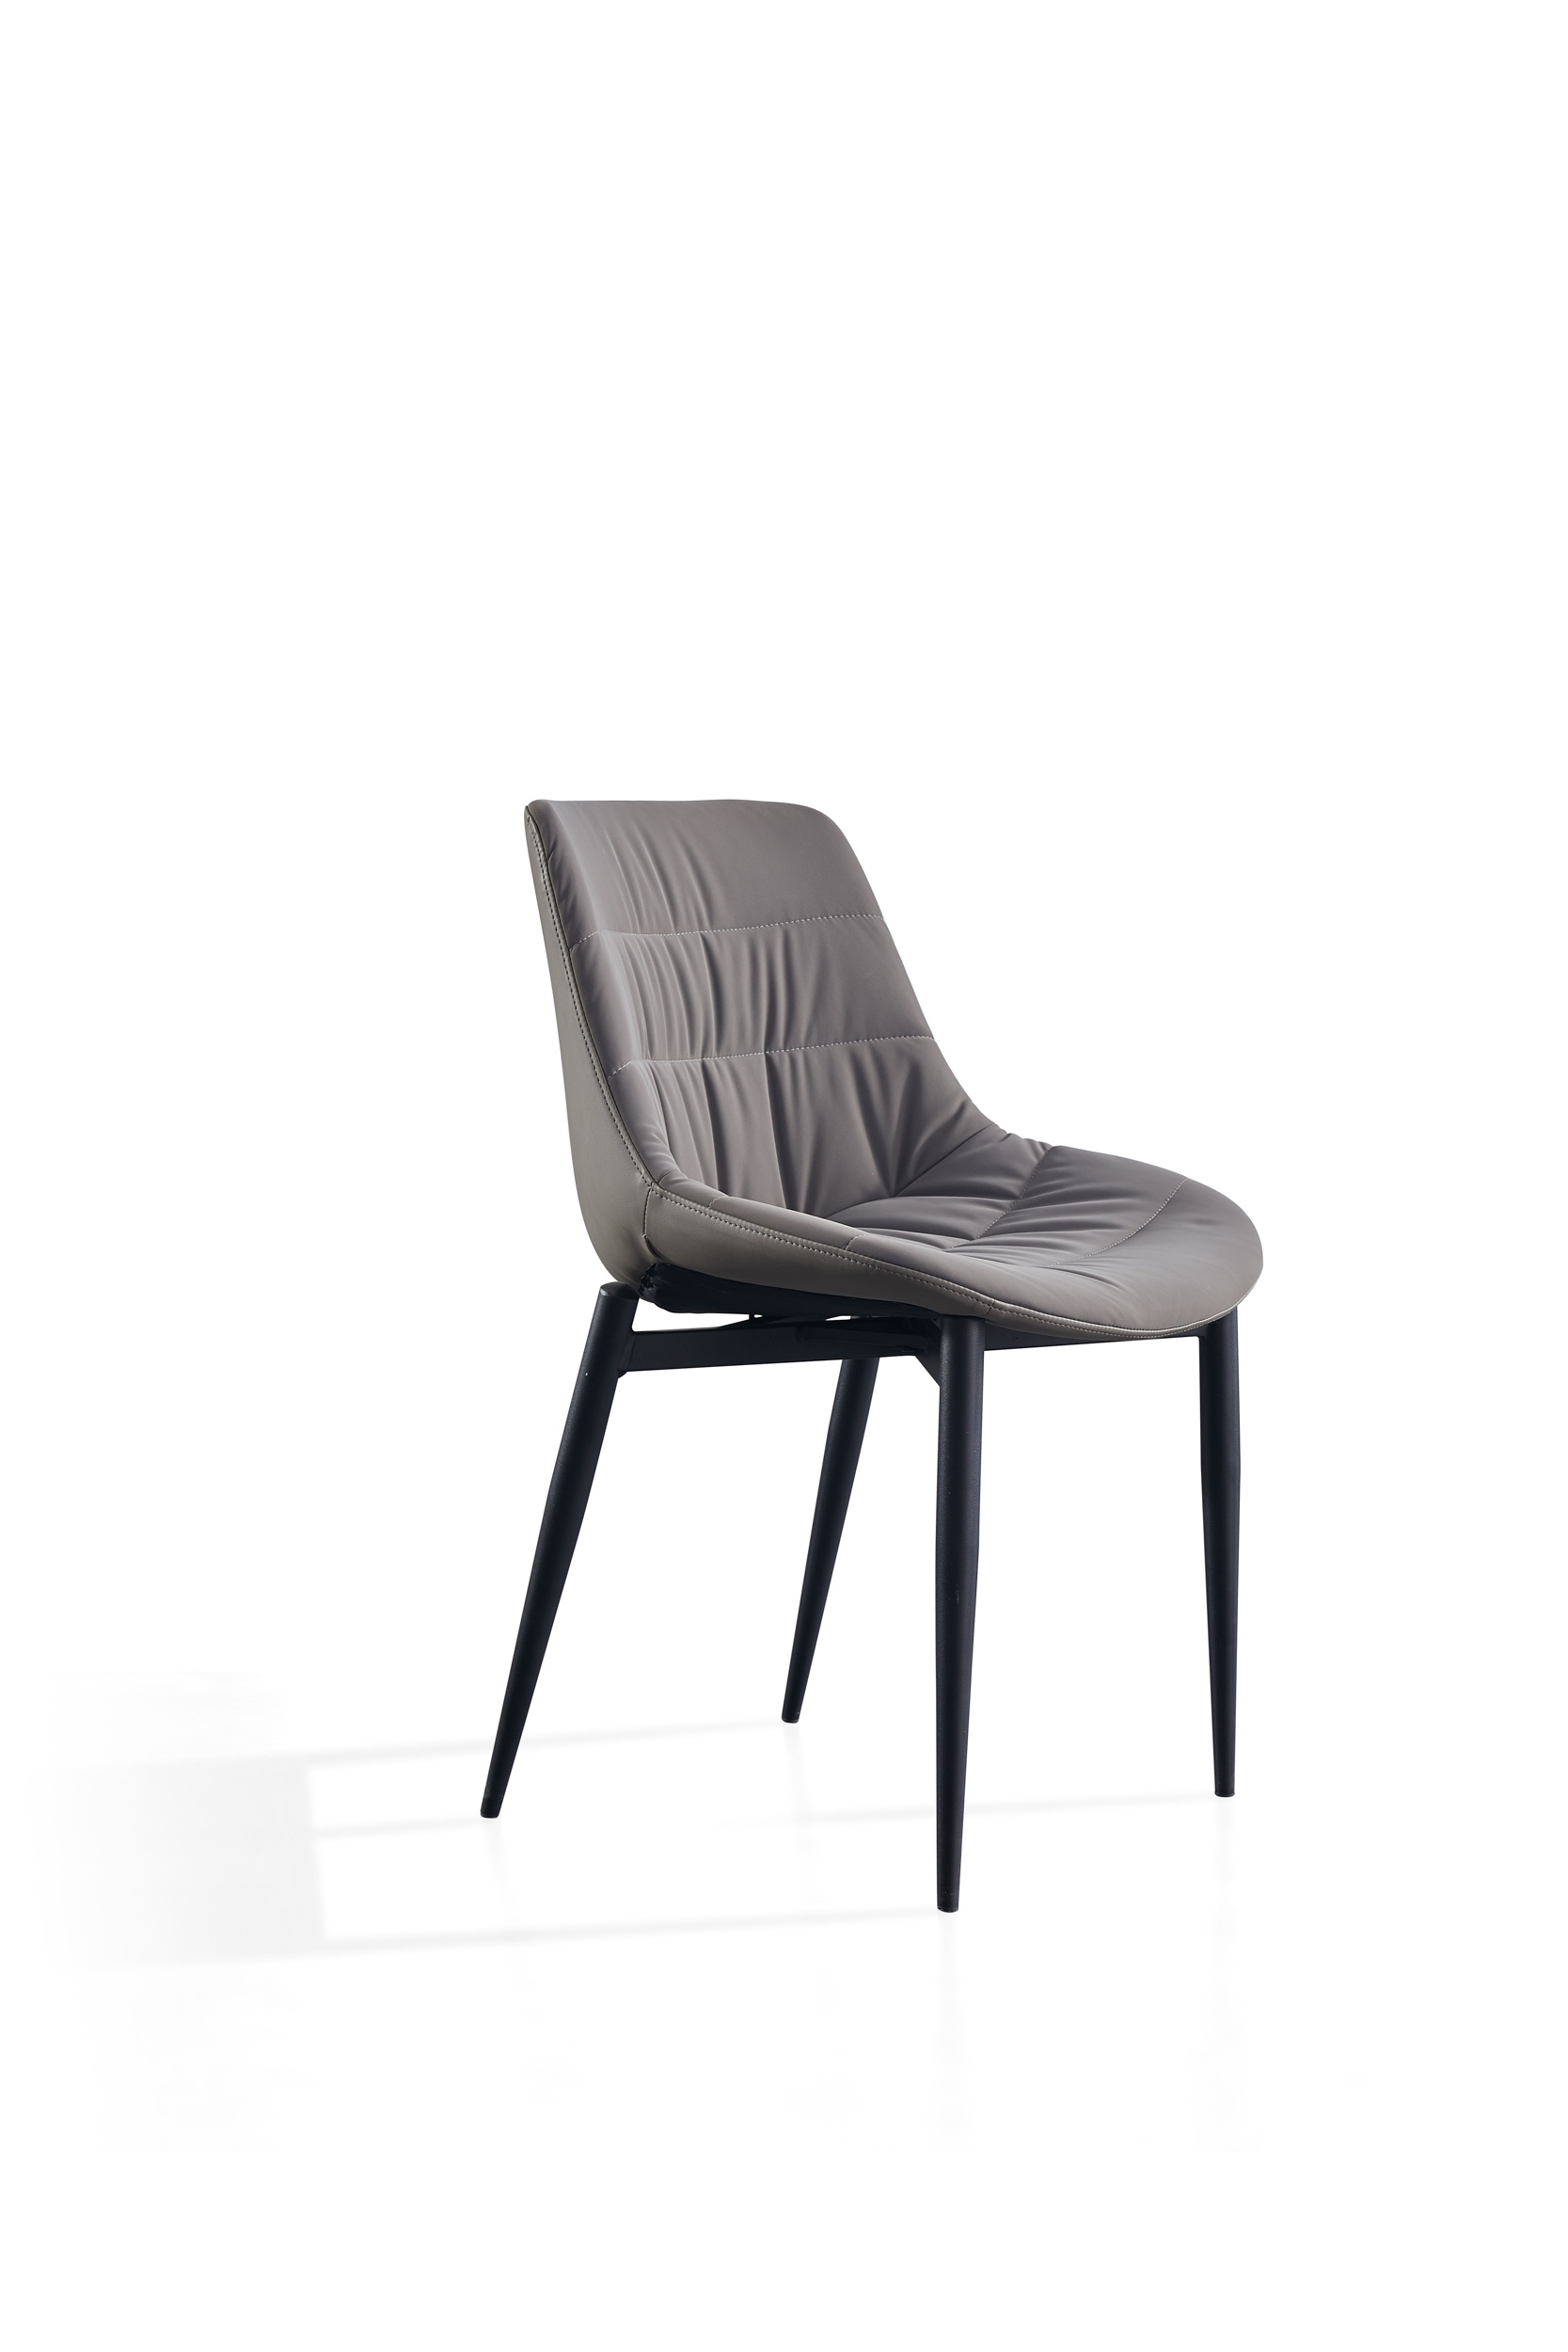 Modern Fabric Dining Chair Home Hotel Restanurant Dining Chair